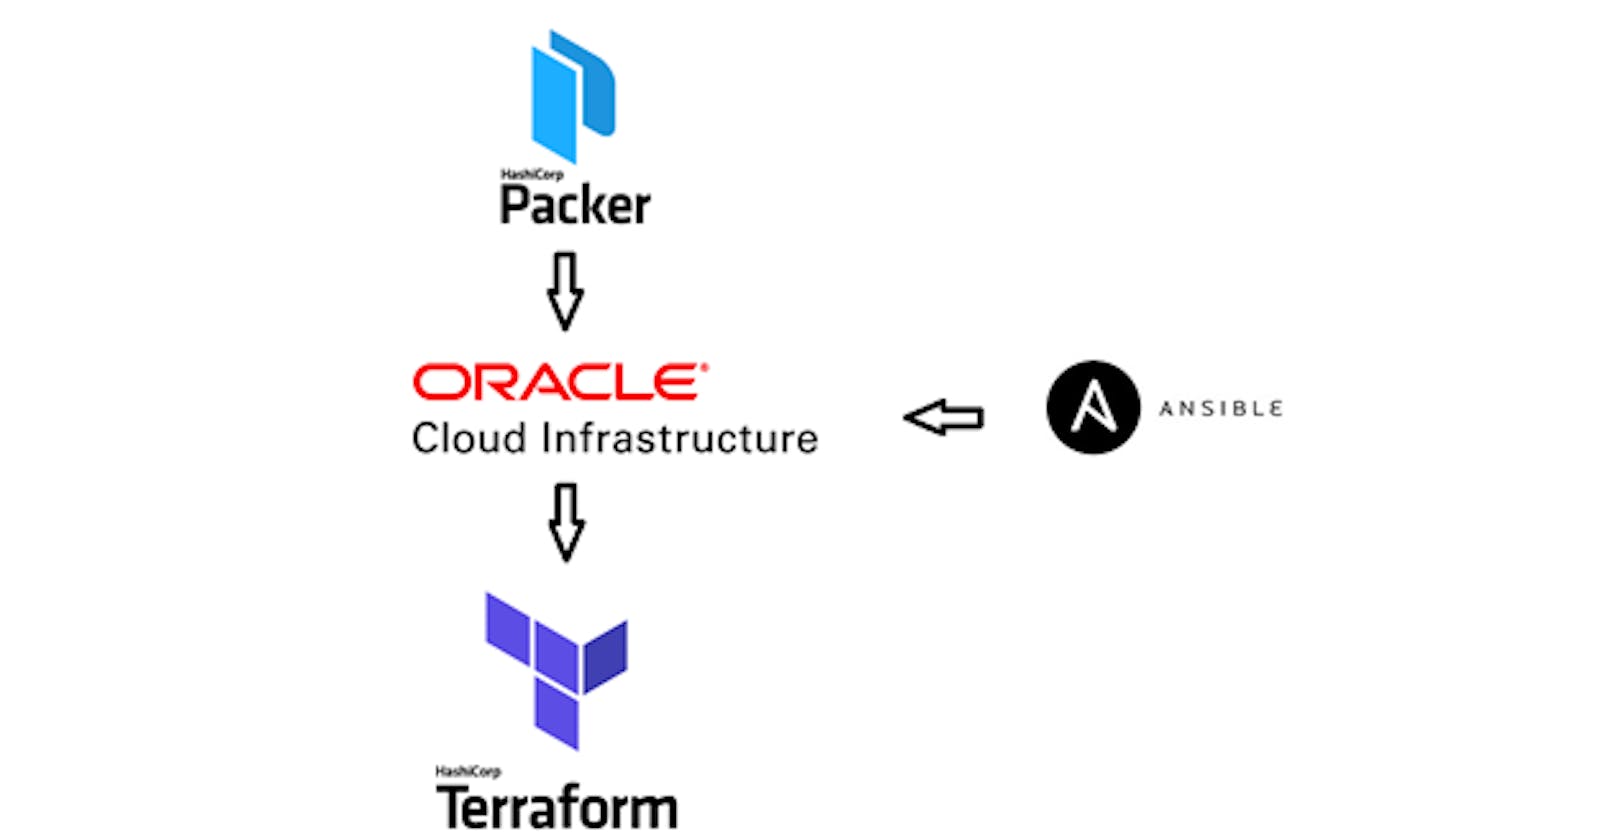 Oracle cloud infrastructure with packer, terraform and ansible